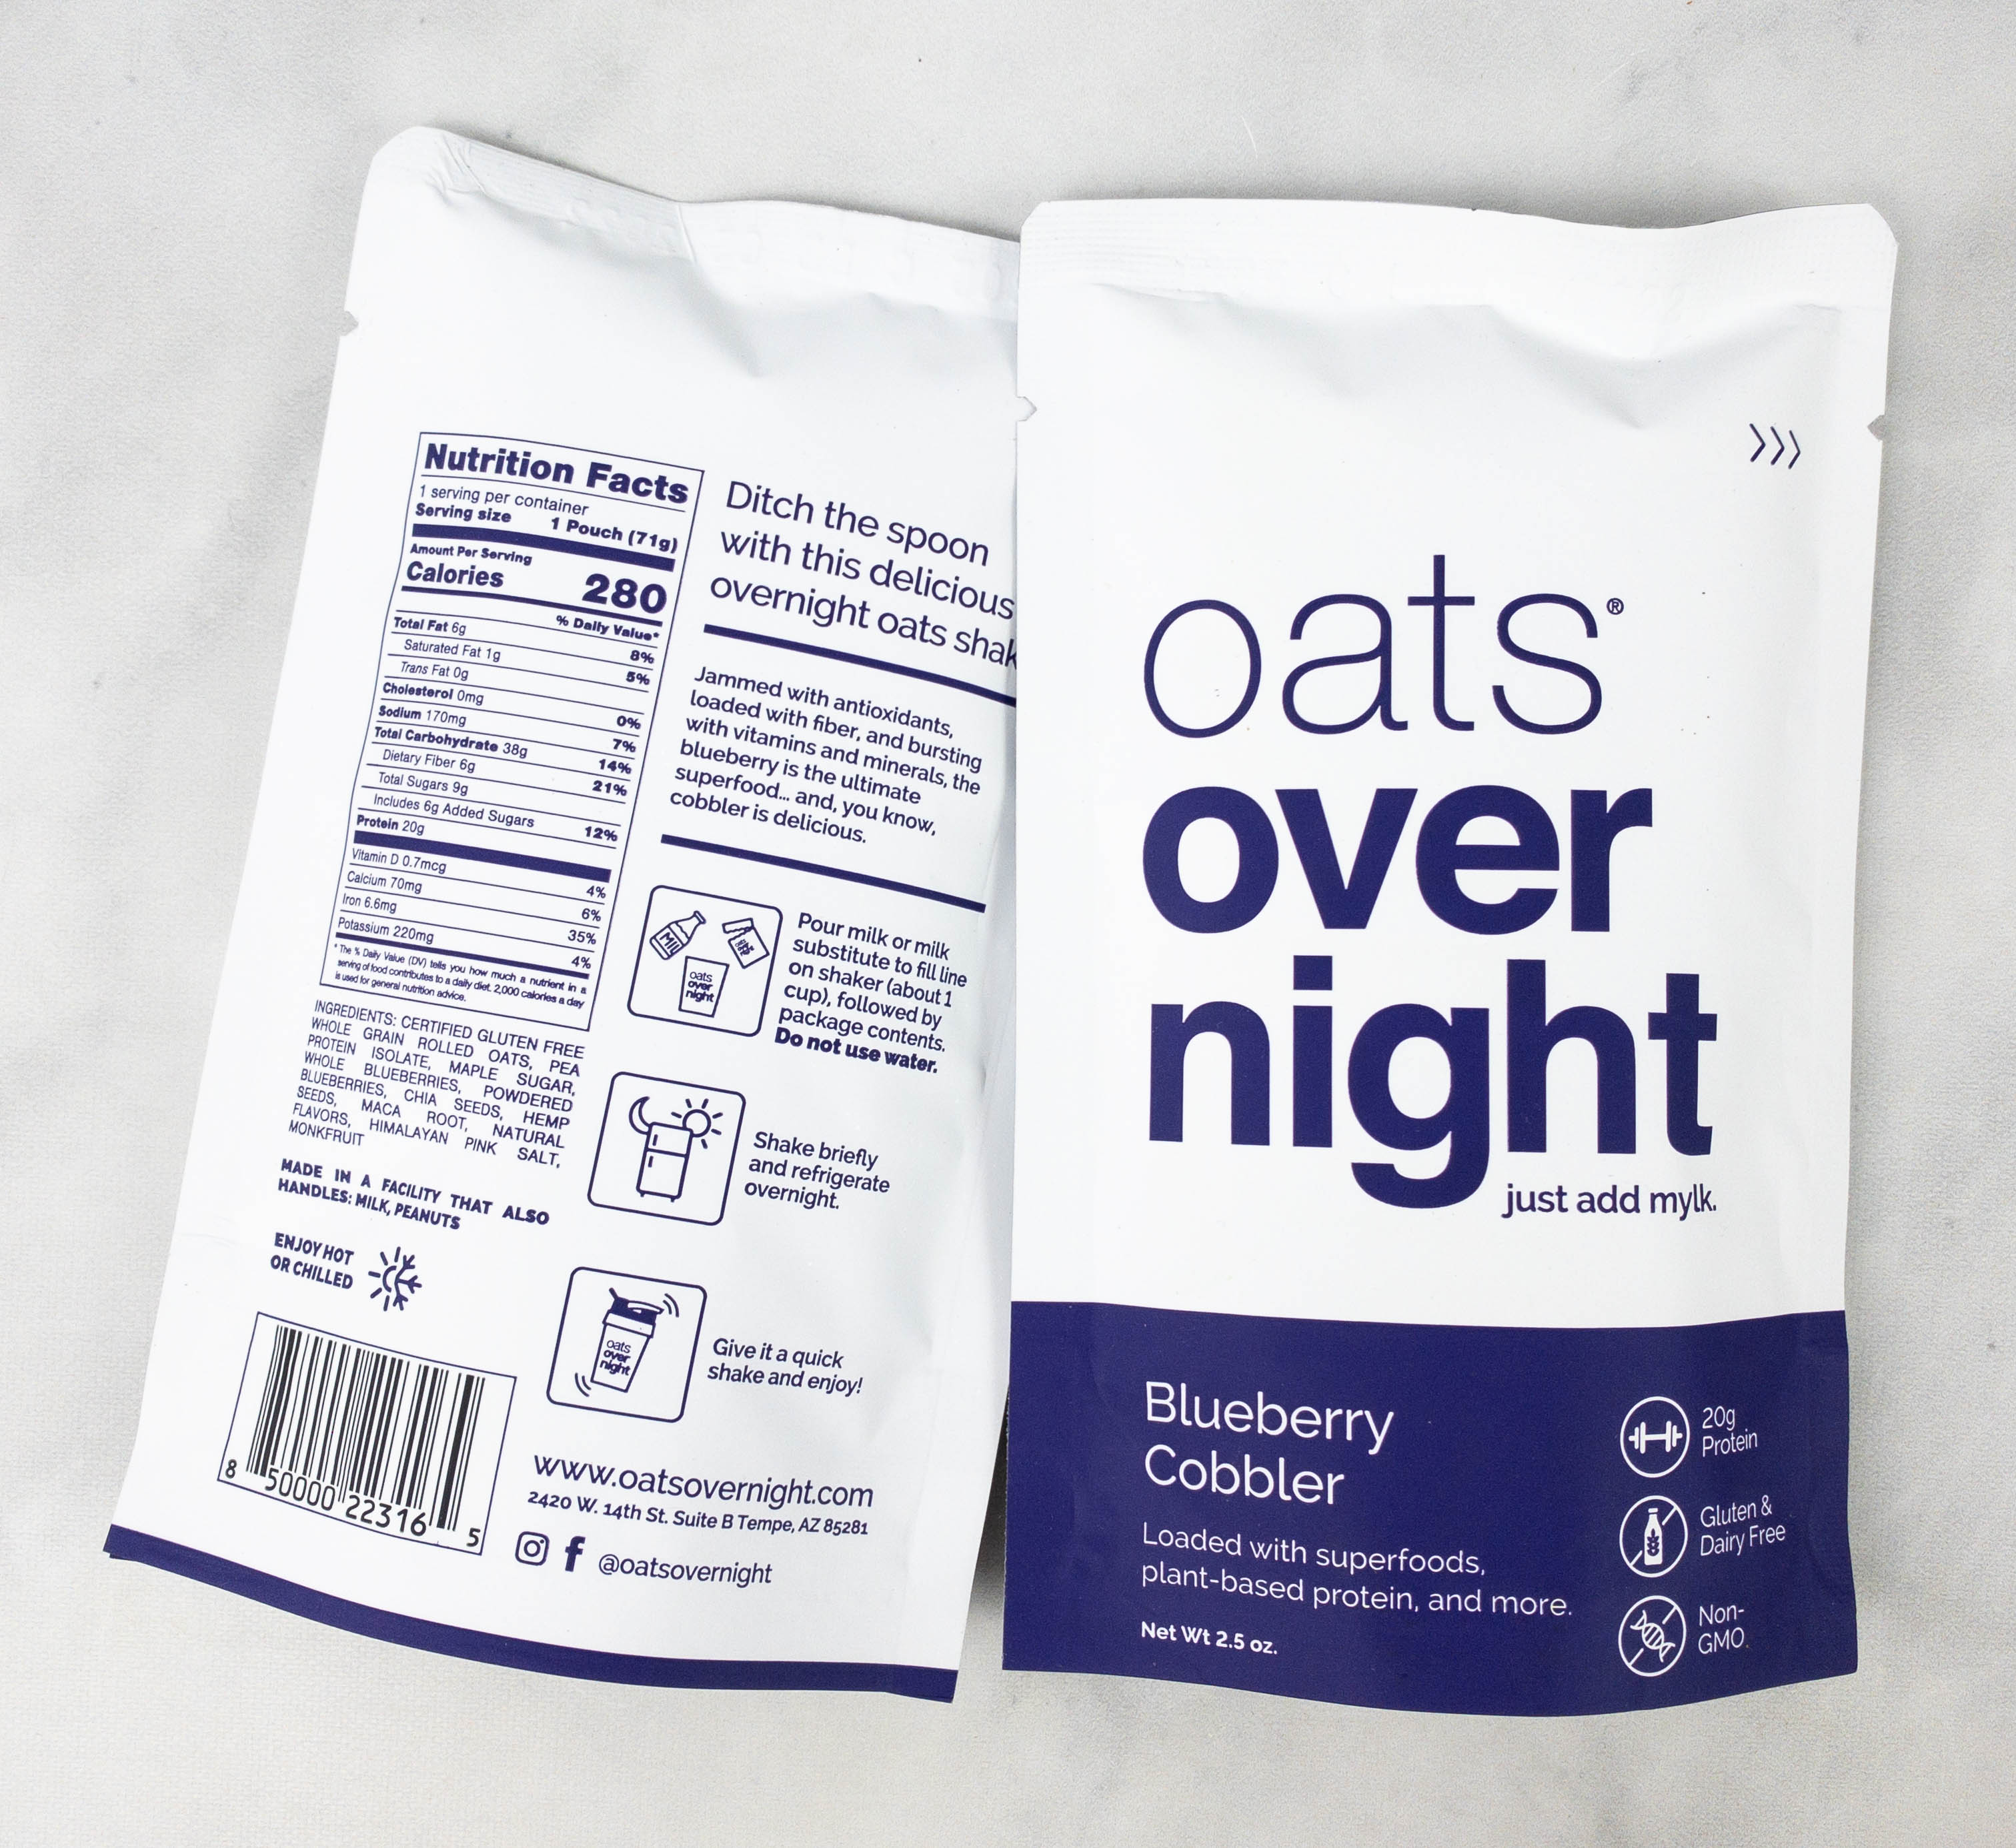 https://hellosubscription.com/wp-content/uploads/2021/05/oats-overnight-review-26.jpg?quality=90&strip=all